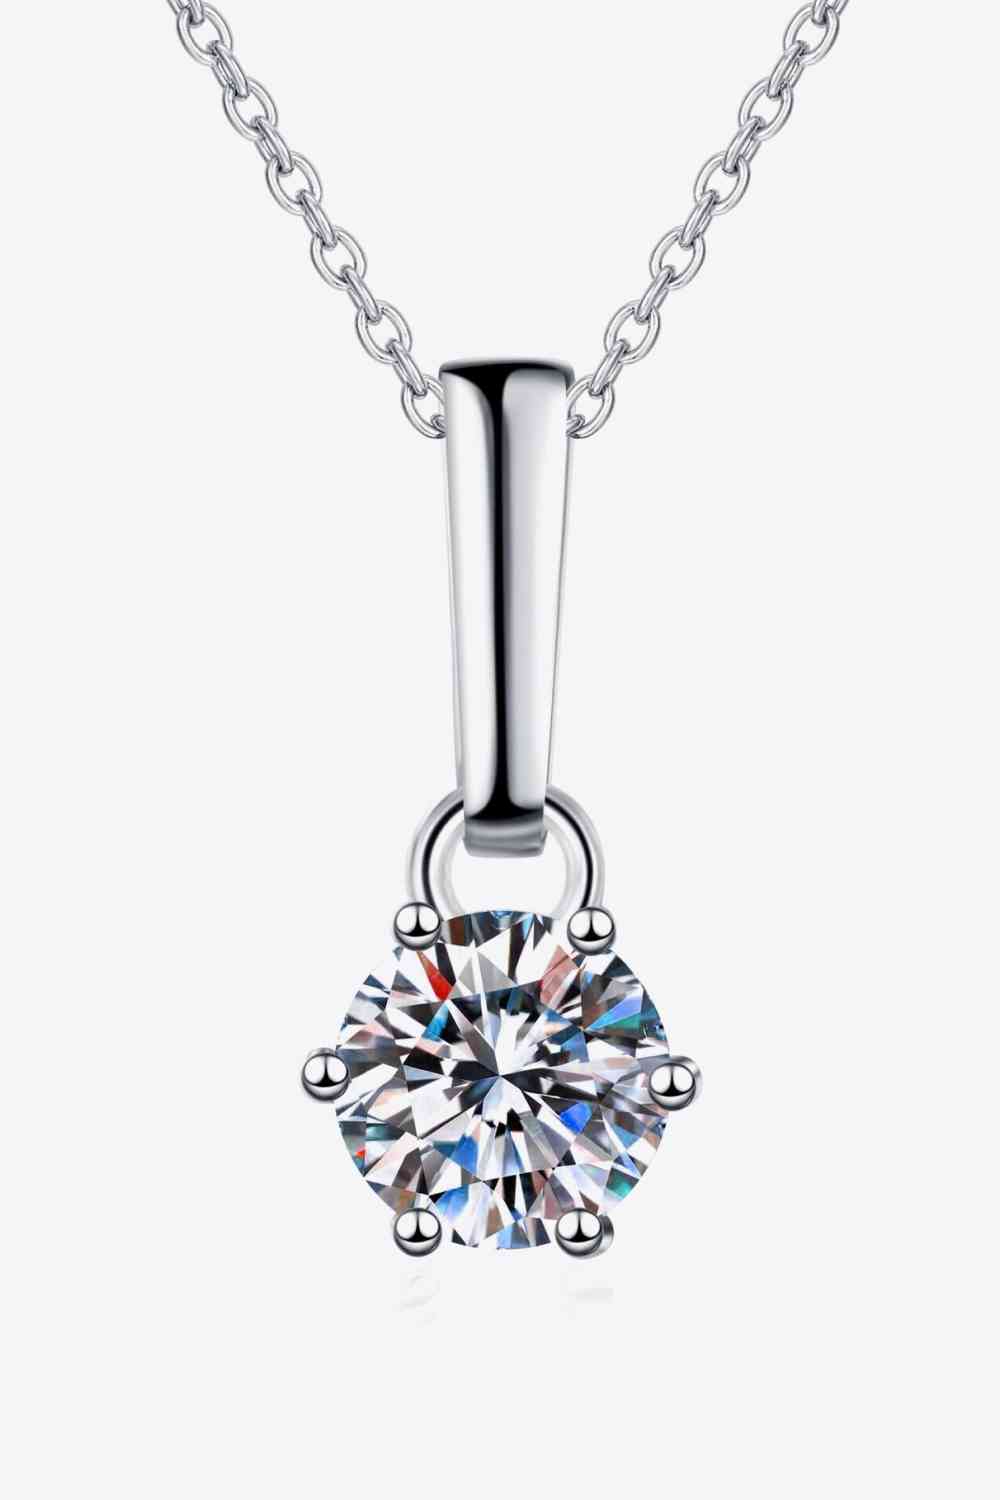 1 Carat Moissanite 925 Sterling Silver Chain-Link Necklace - lolaluxeshop